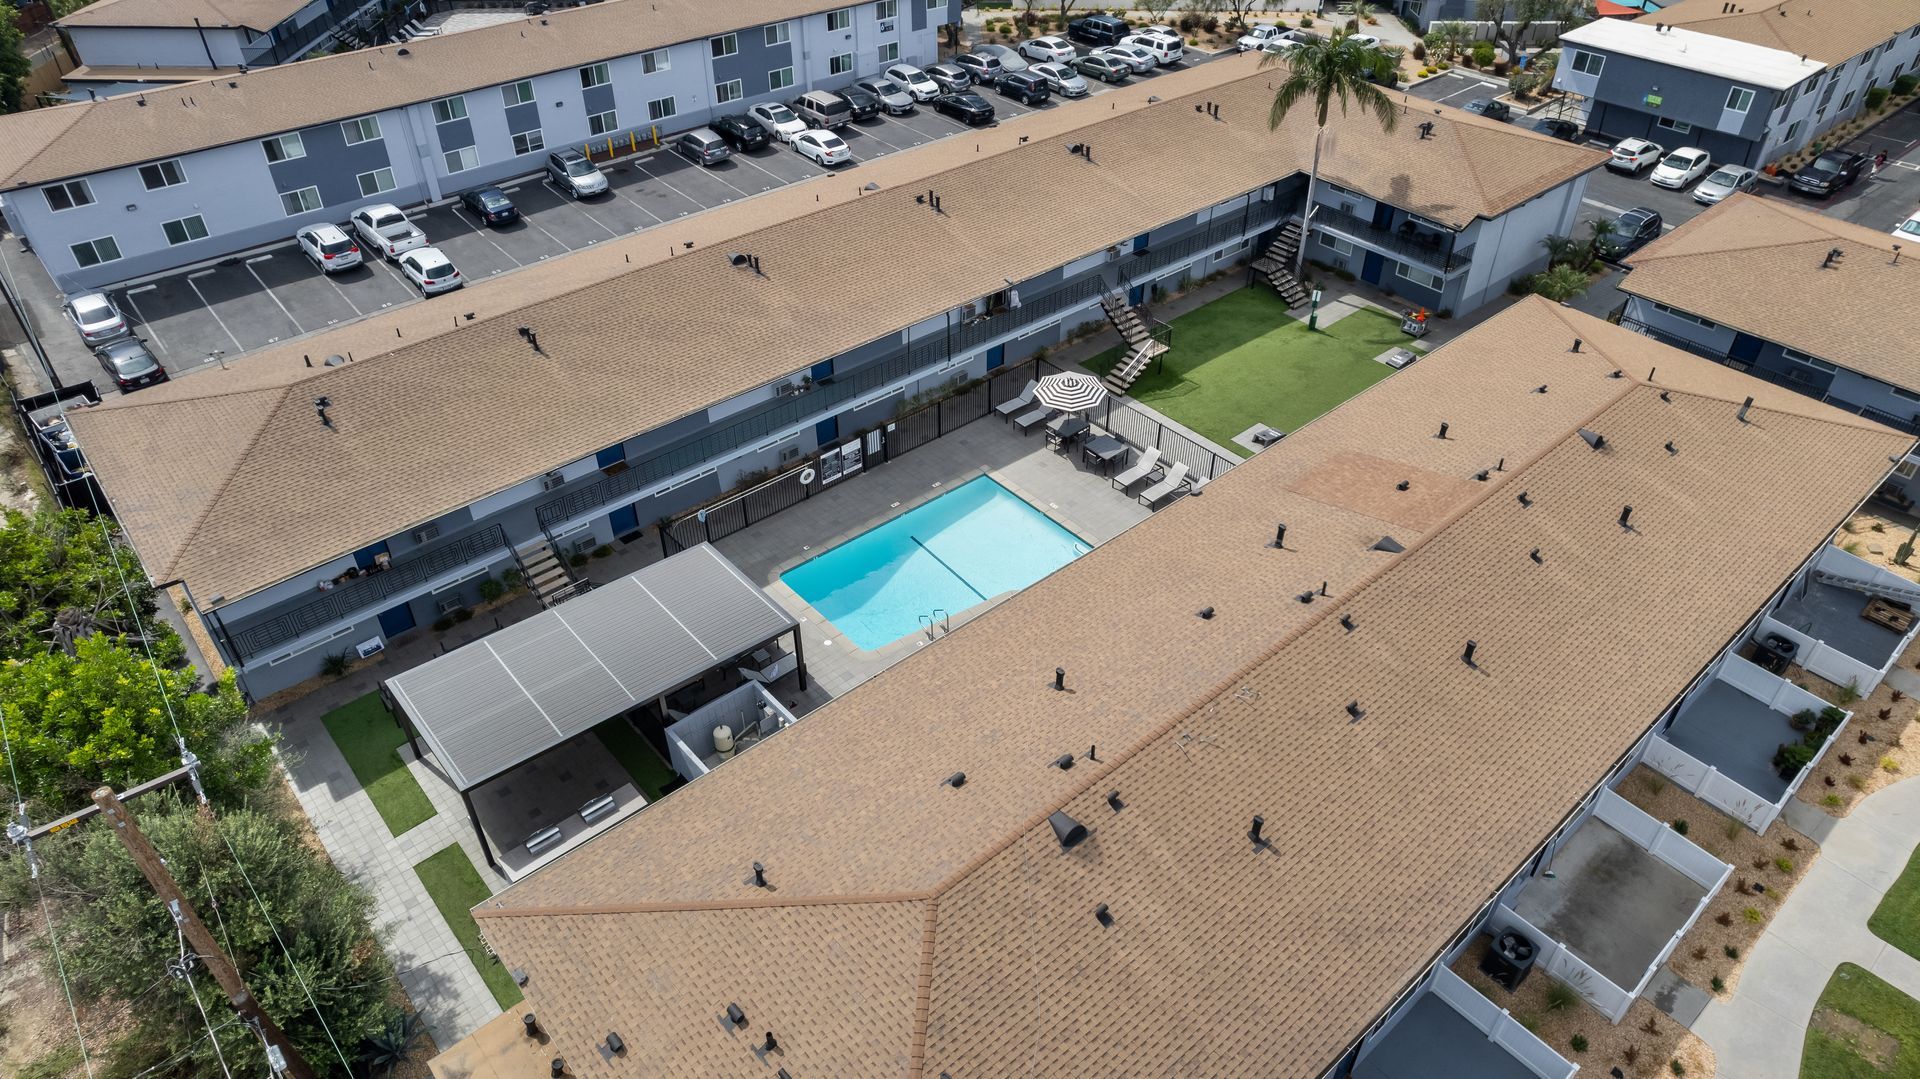 An aerial view of a large apartment complex with a swimming pool in the middle.